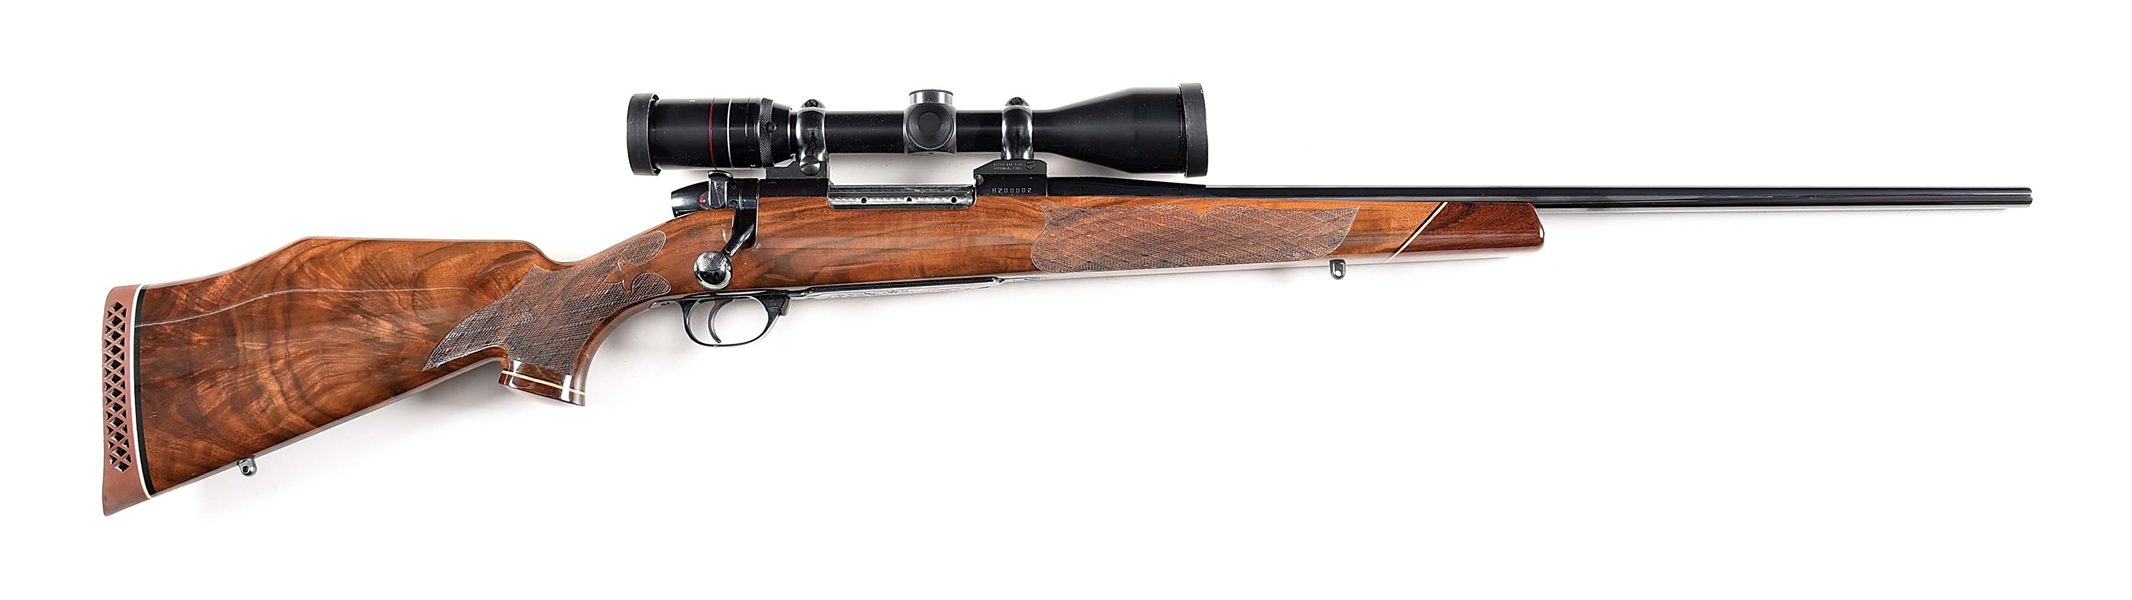 (M) WEATHERBY MARK V BOLT ACTION RIFLE IN .257 WEATHERBY MAGNUM.